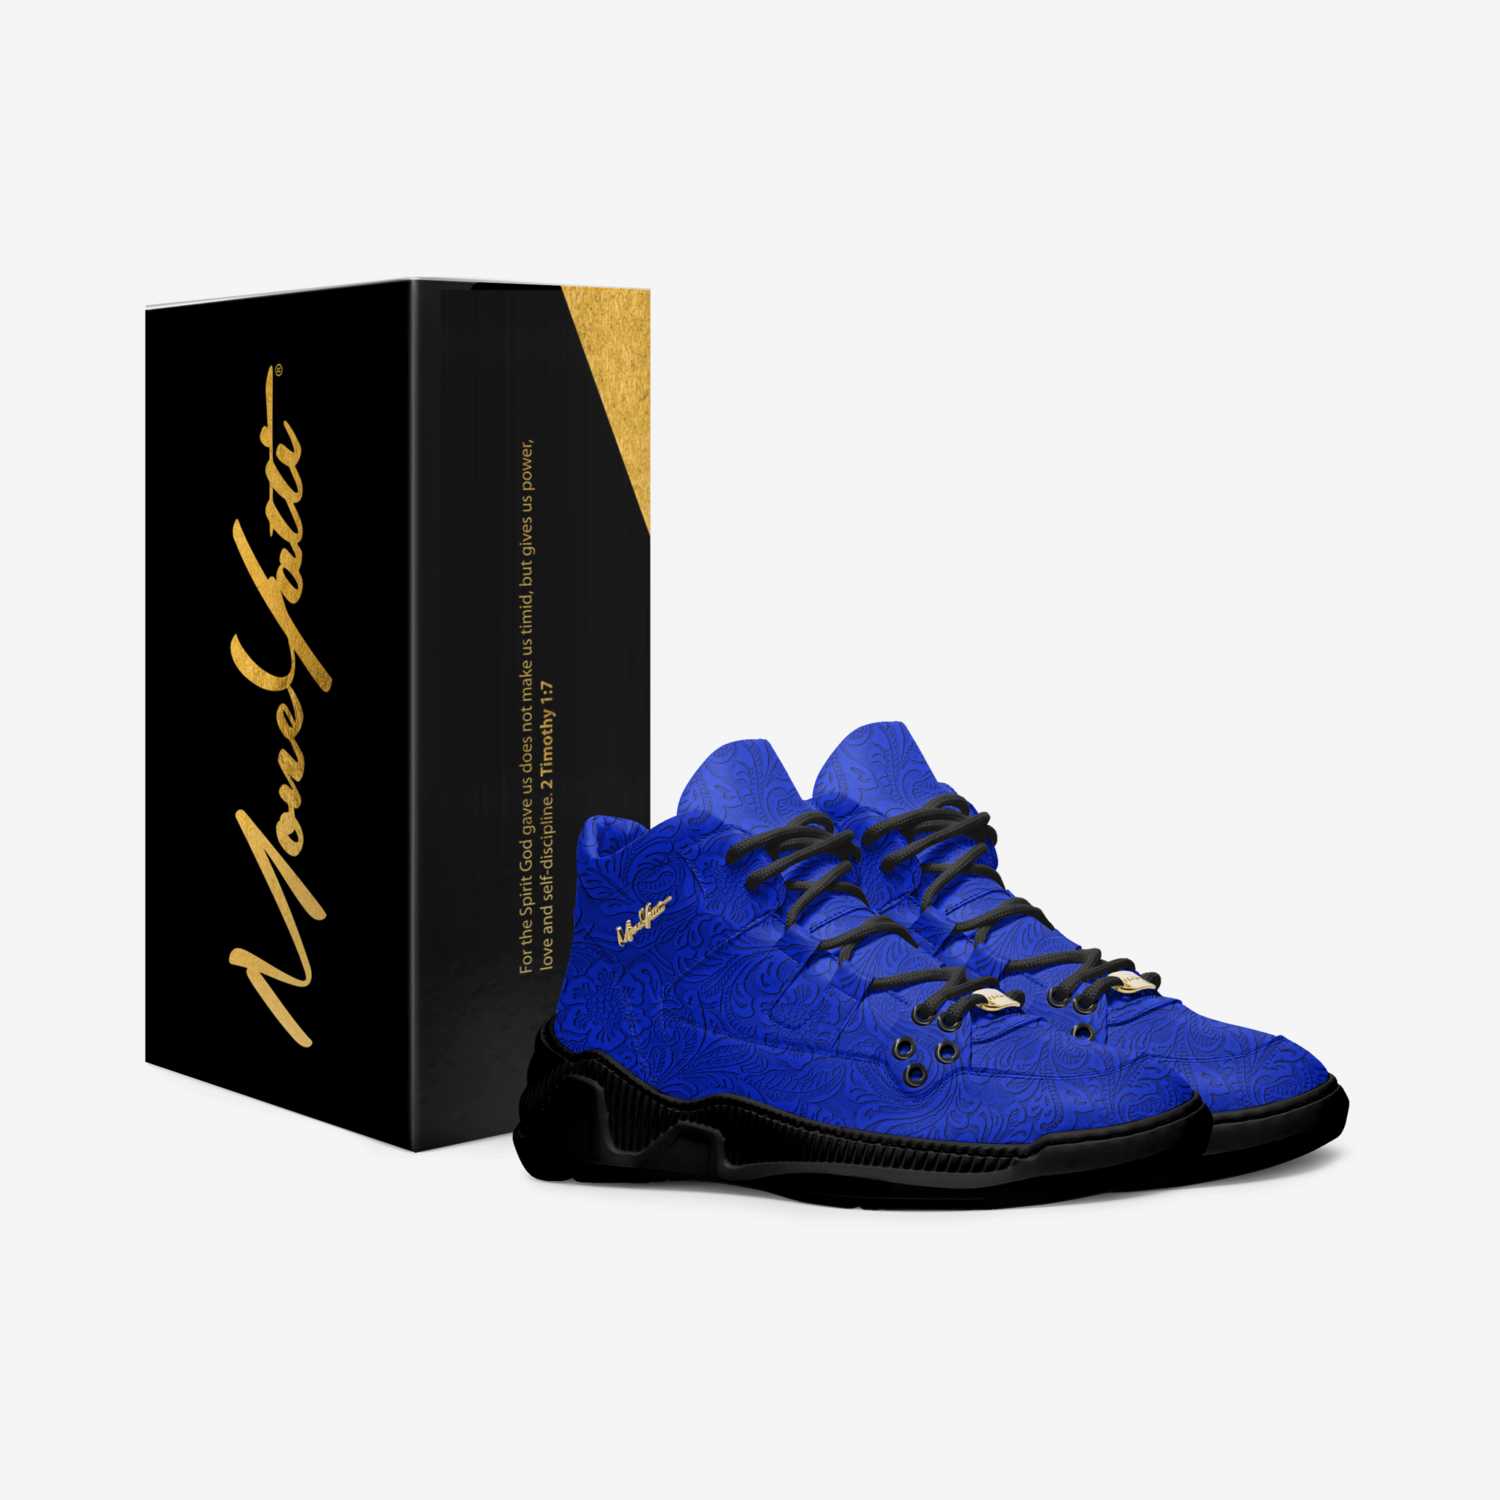 Masterpiece 009 custom made in Italy shoes by Moneyatti Brand | Box view